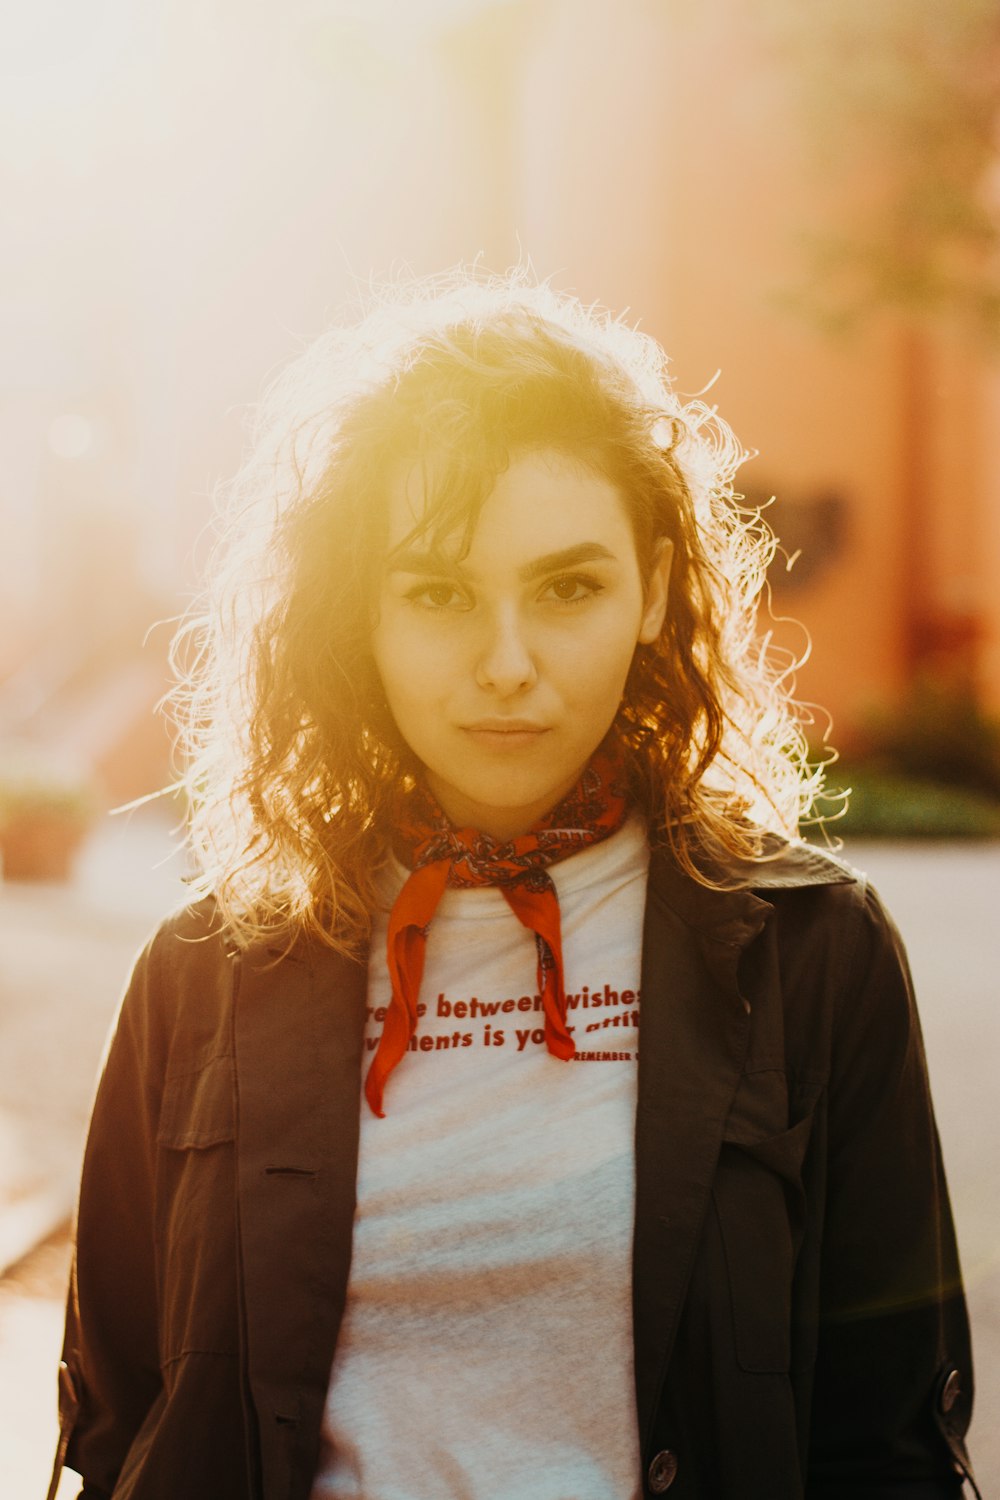 woman wearing black jacket and white crew-neck shirt in golden hour photography